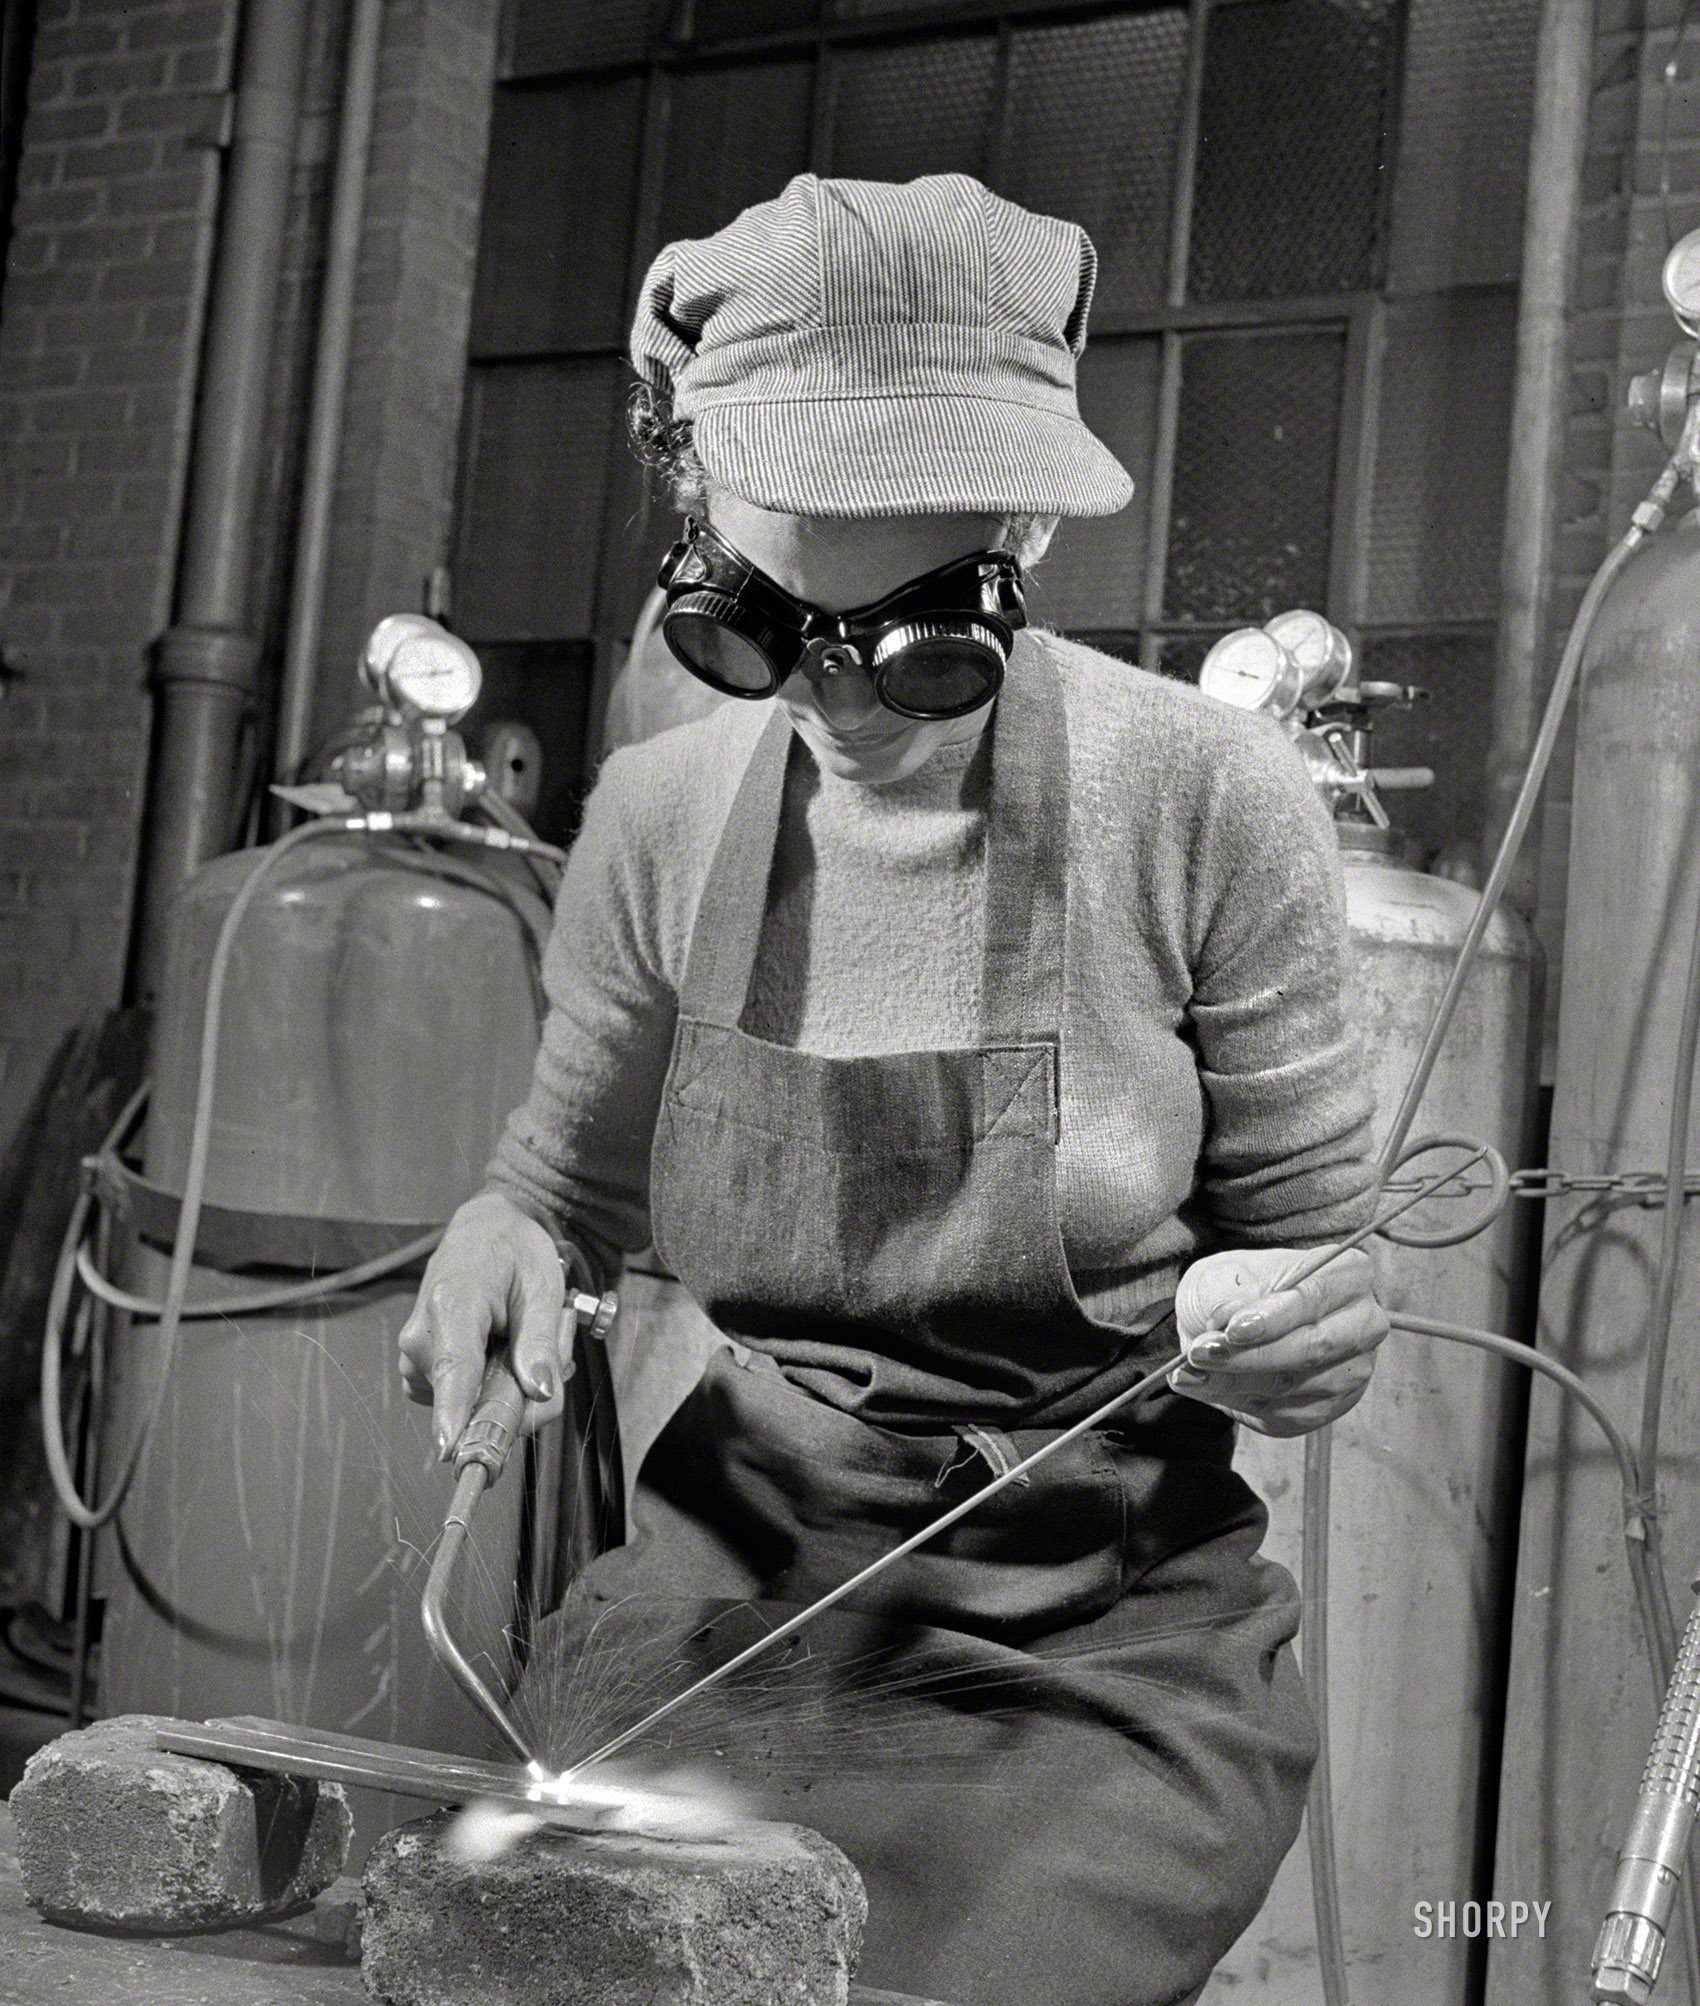 &nbsp; &nbsp; &nbsp; &nbsp; This young lady is training to work on the assembly line of one of our great war plants. In preparation for this task, she devotes six nights a week to a WPA vocational training school where experienced instructors show her the technique of modern welding.

July 1942. "Work Projects Administration vocational school in Washington, D.C." Photo by Howard Liberman, Office of War Information. View full size.
